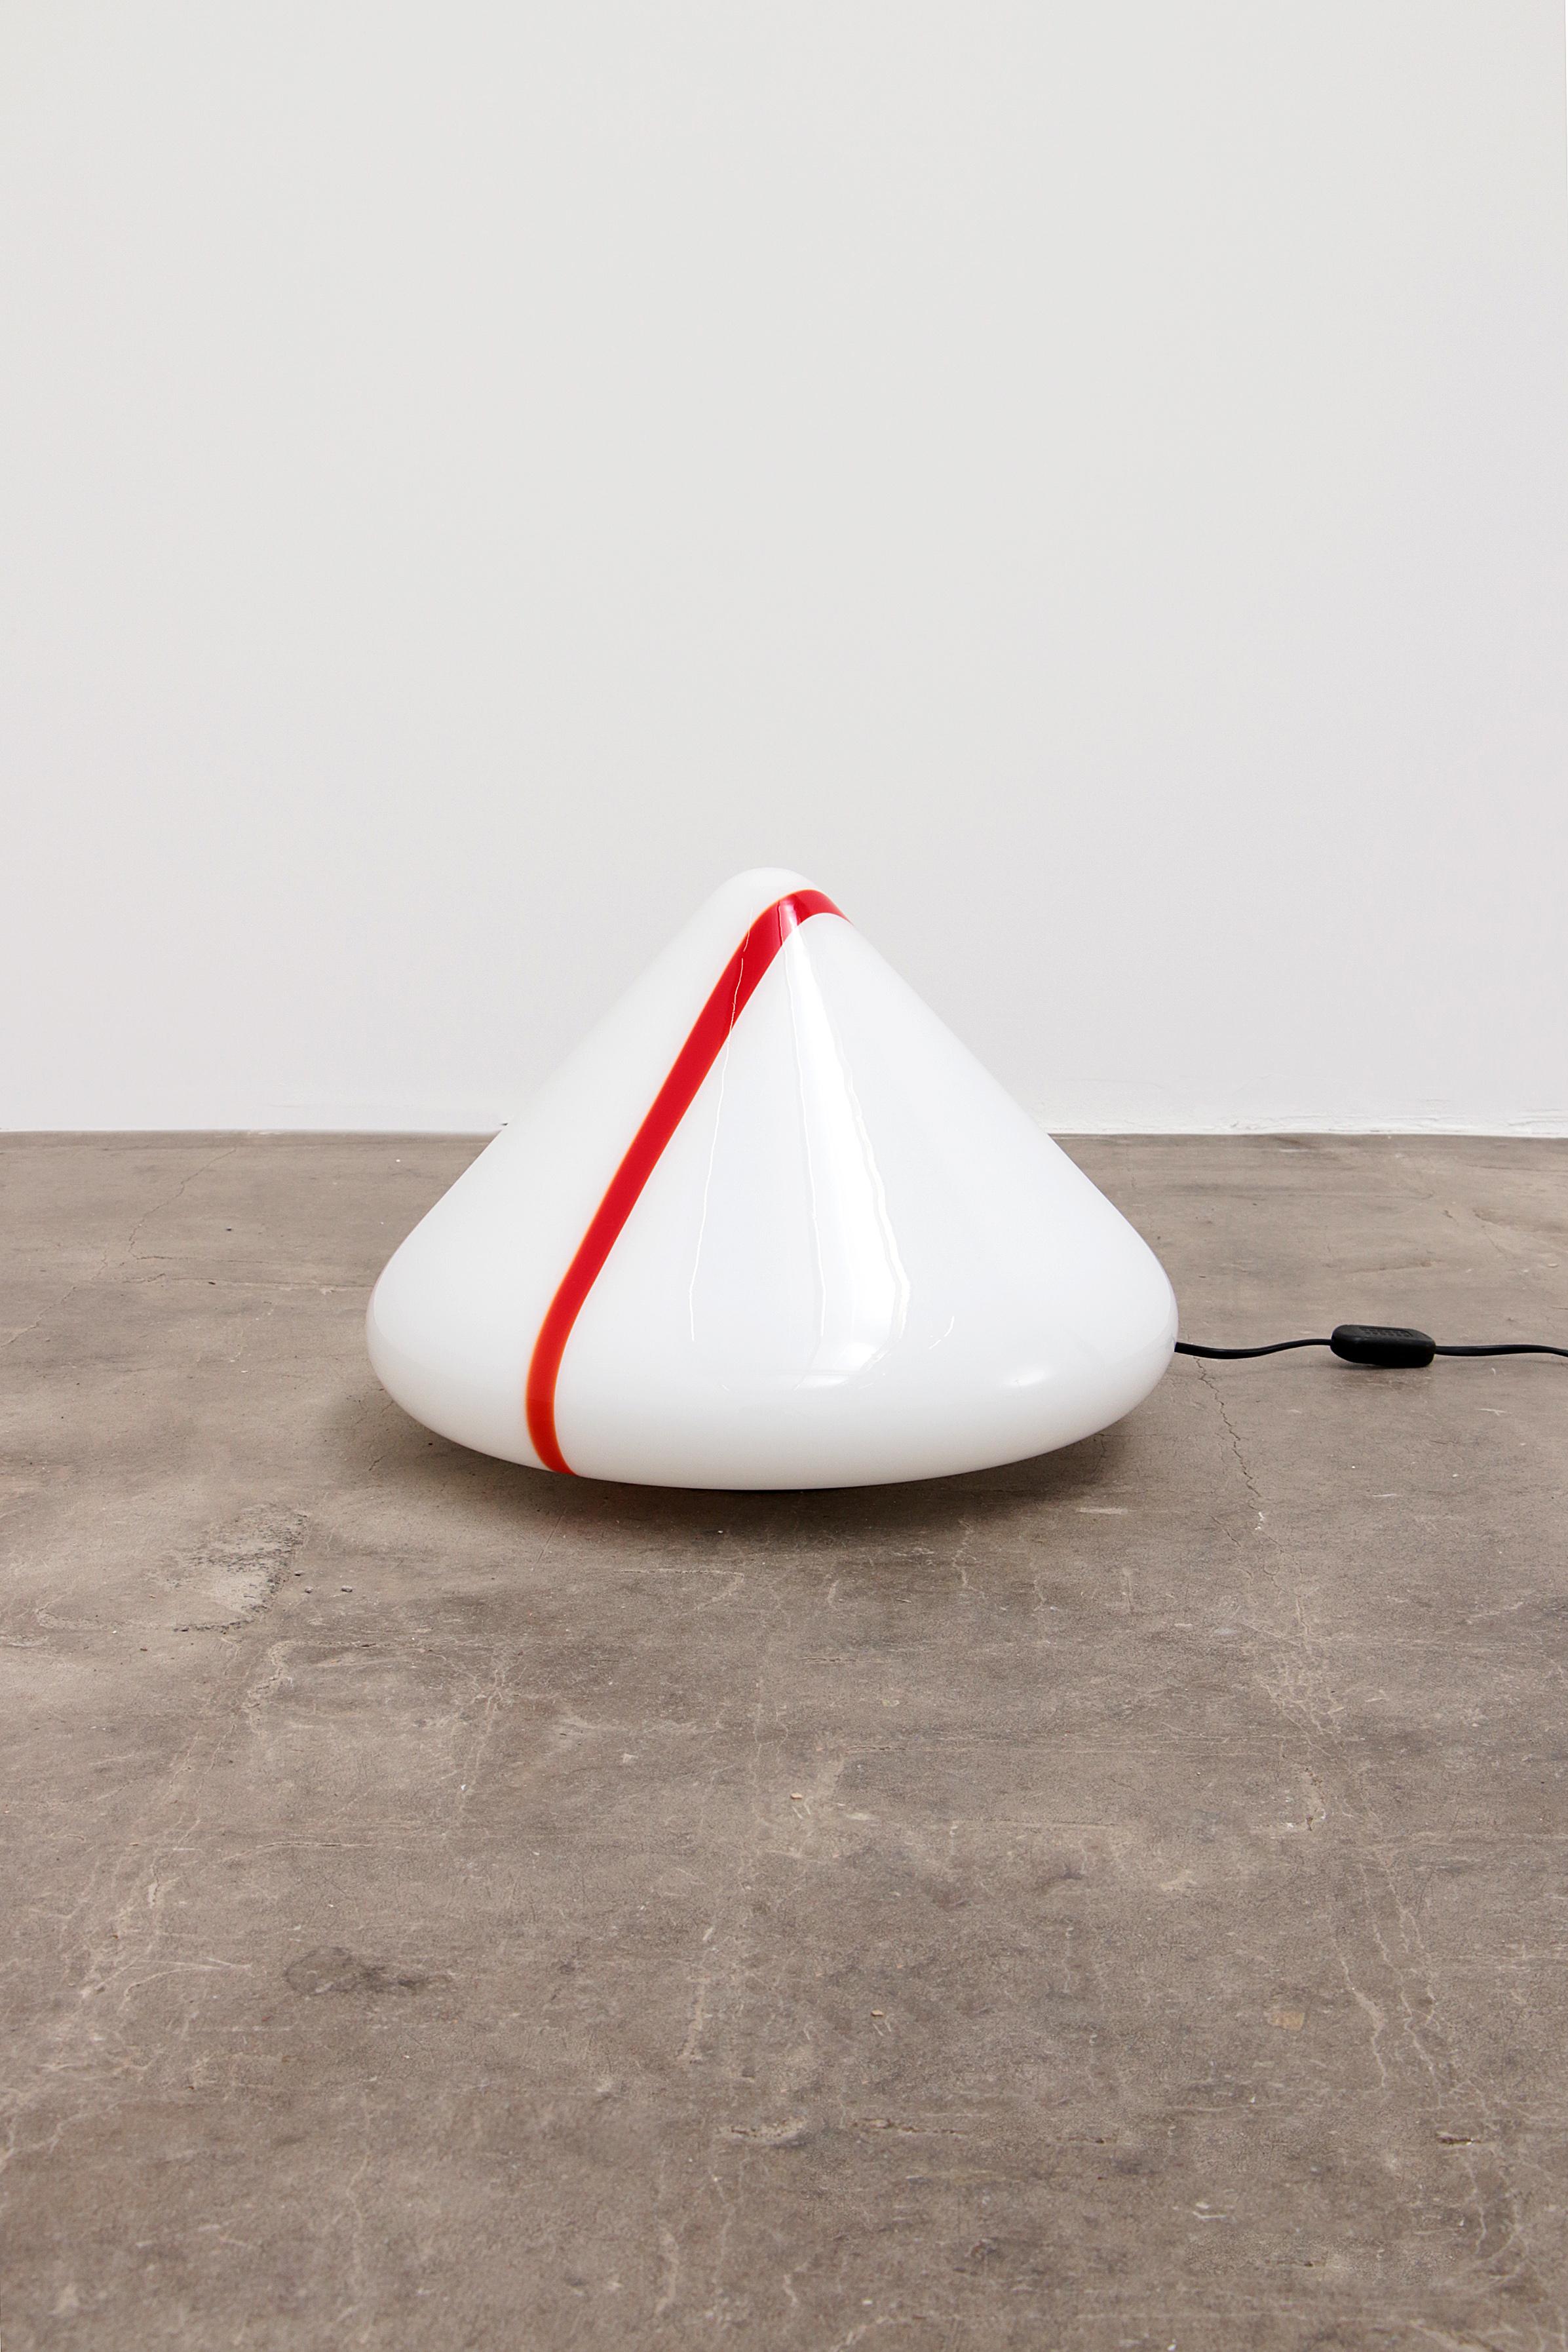 This is a beautiful table lamp made by Renato Toso for Leucos, 1970s.

The special pyramid shape makes this a beautiful unique item.
It is made of clear white Murano glass with a bright red stripe that makes the lamp a real eye-catcher. The lamp